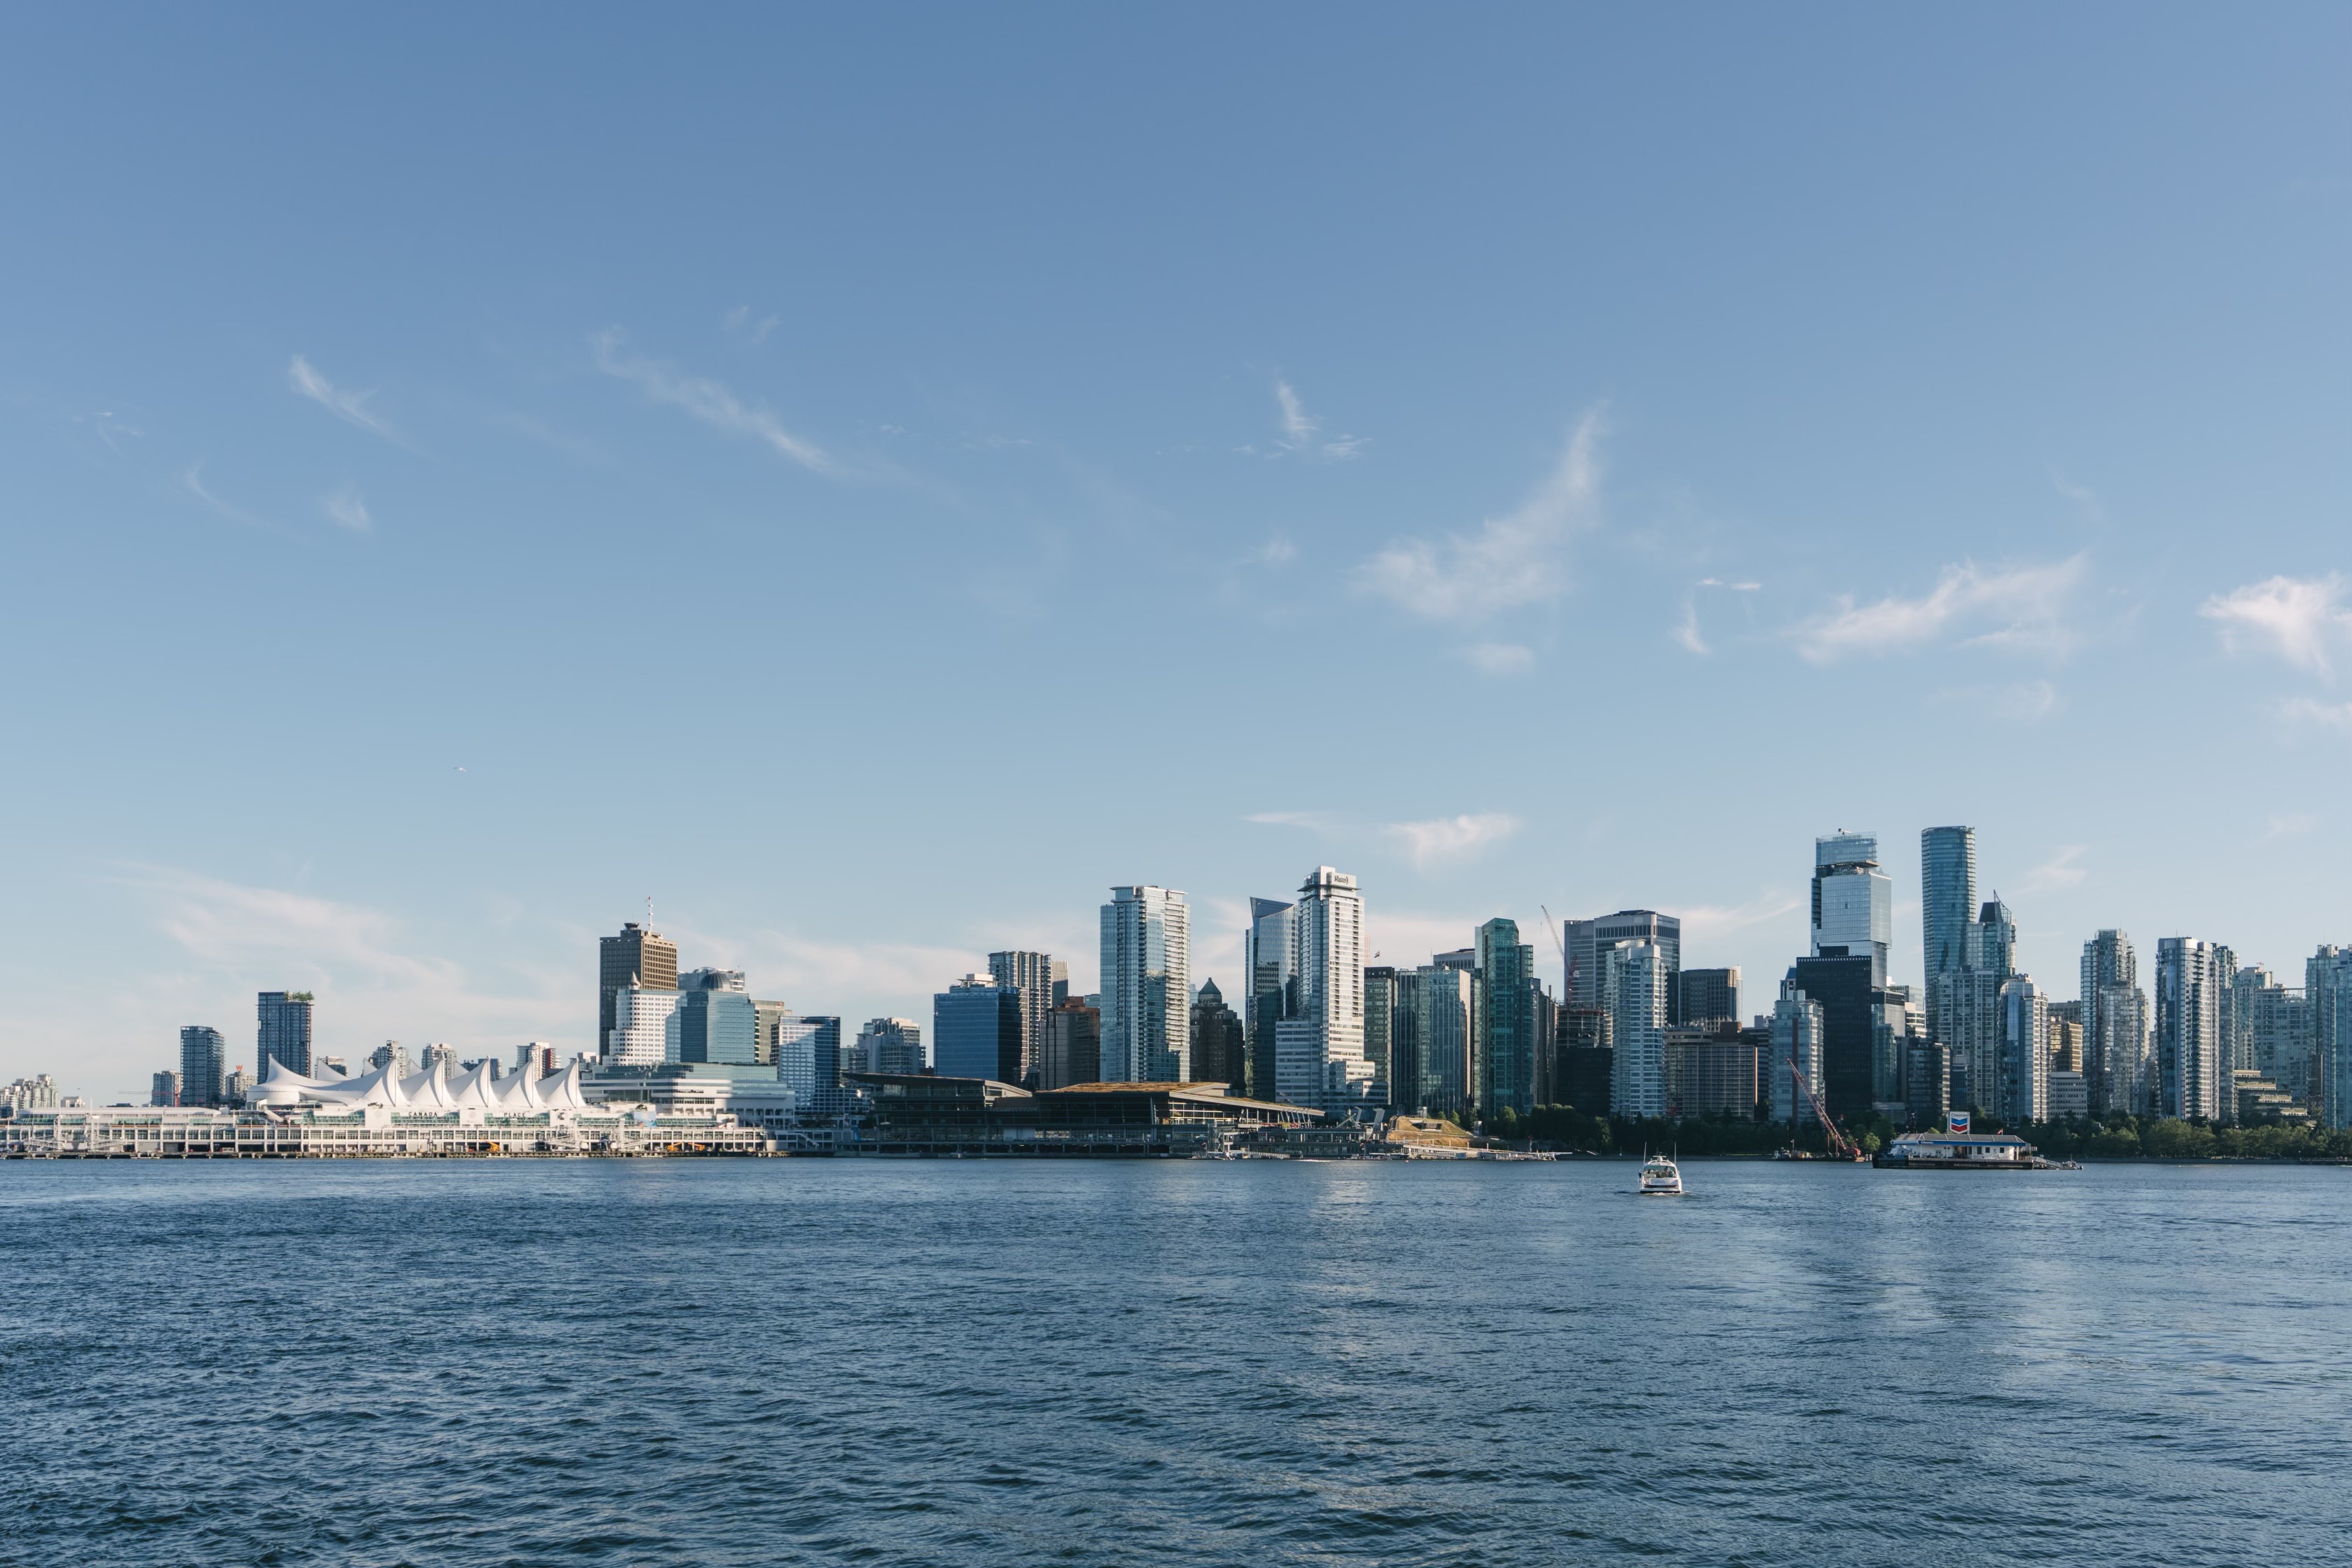 The city of Vancouver as seen from the harbour